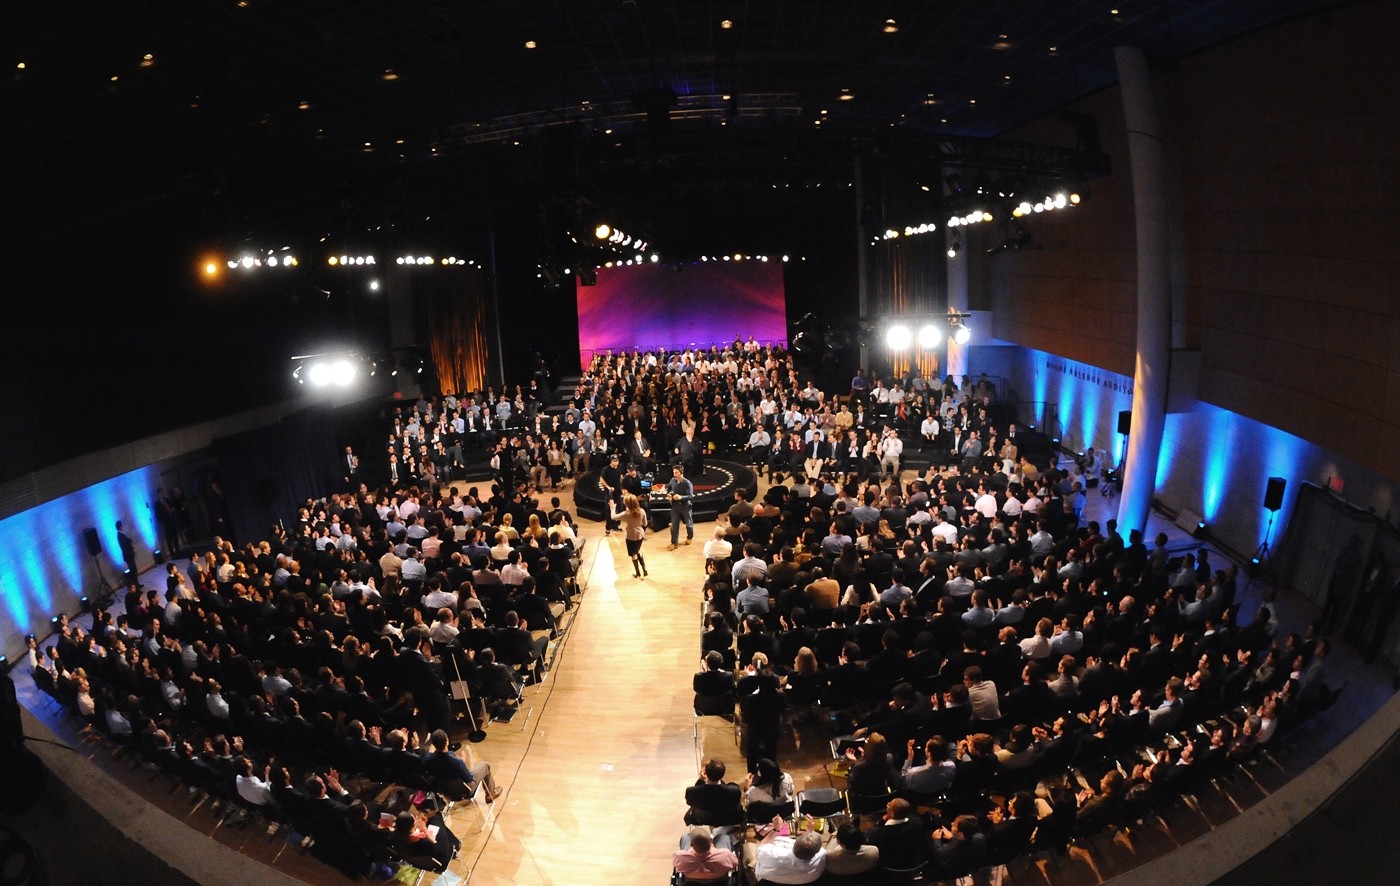 A large conference conducted in the Roone Arledge Auditorium in Lerner Hall.